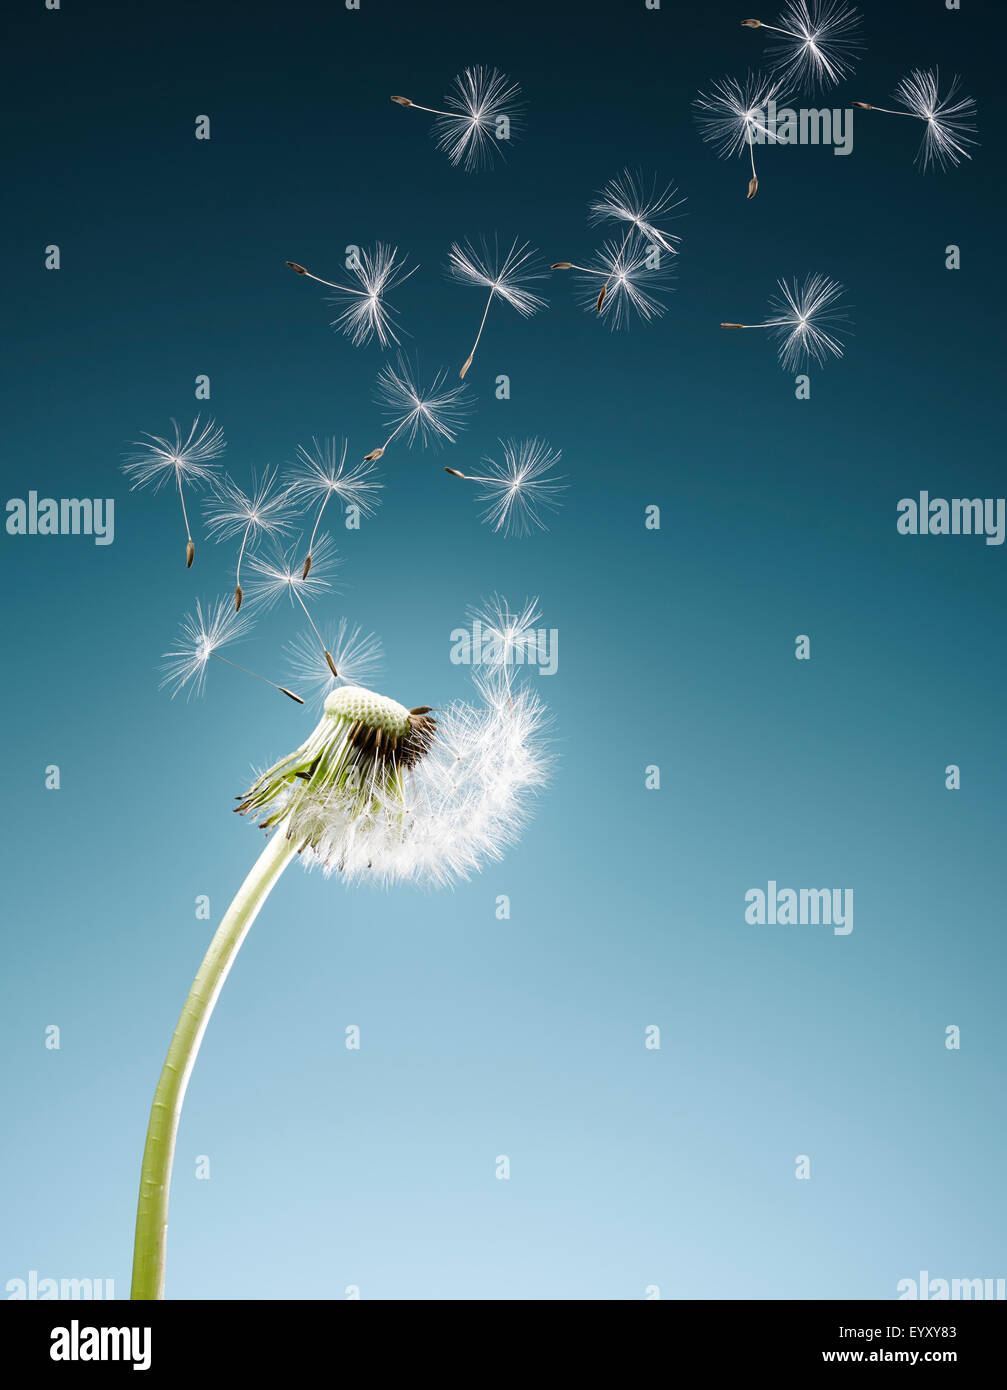 Dandelion seeds blowing on blue background Stock Photo